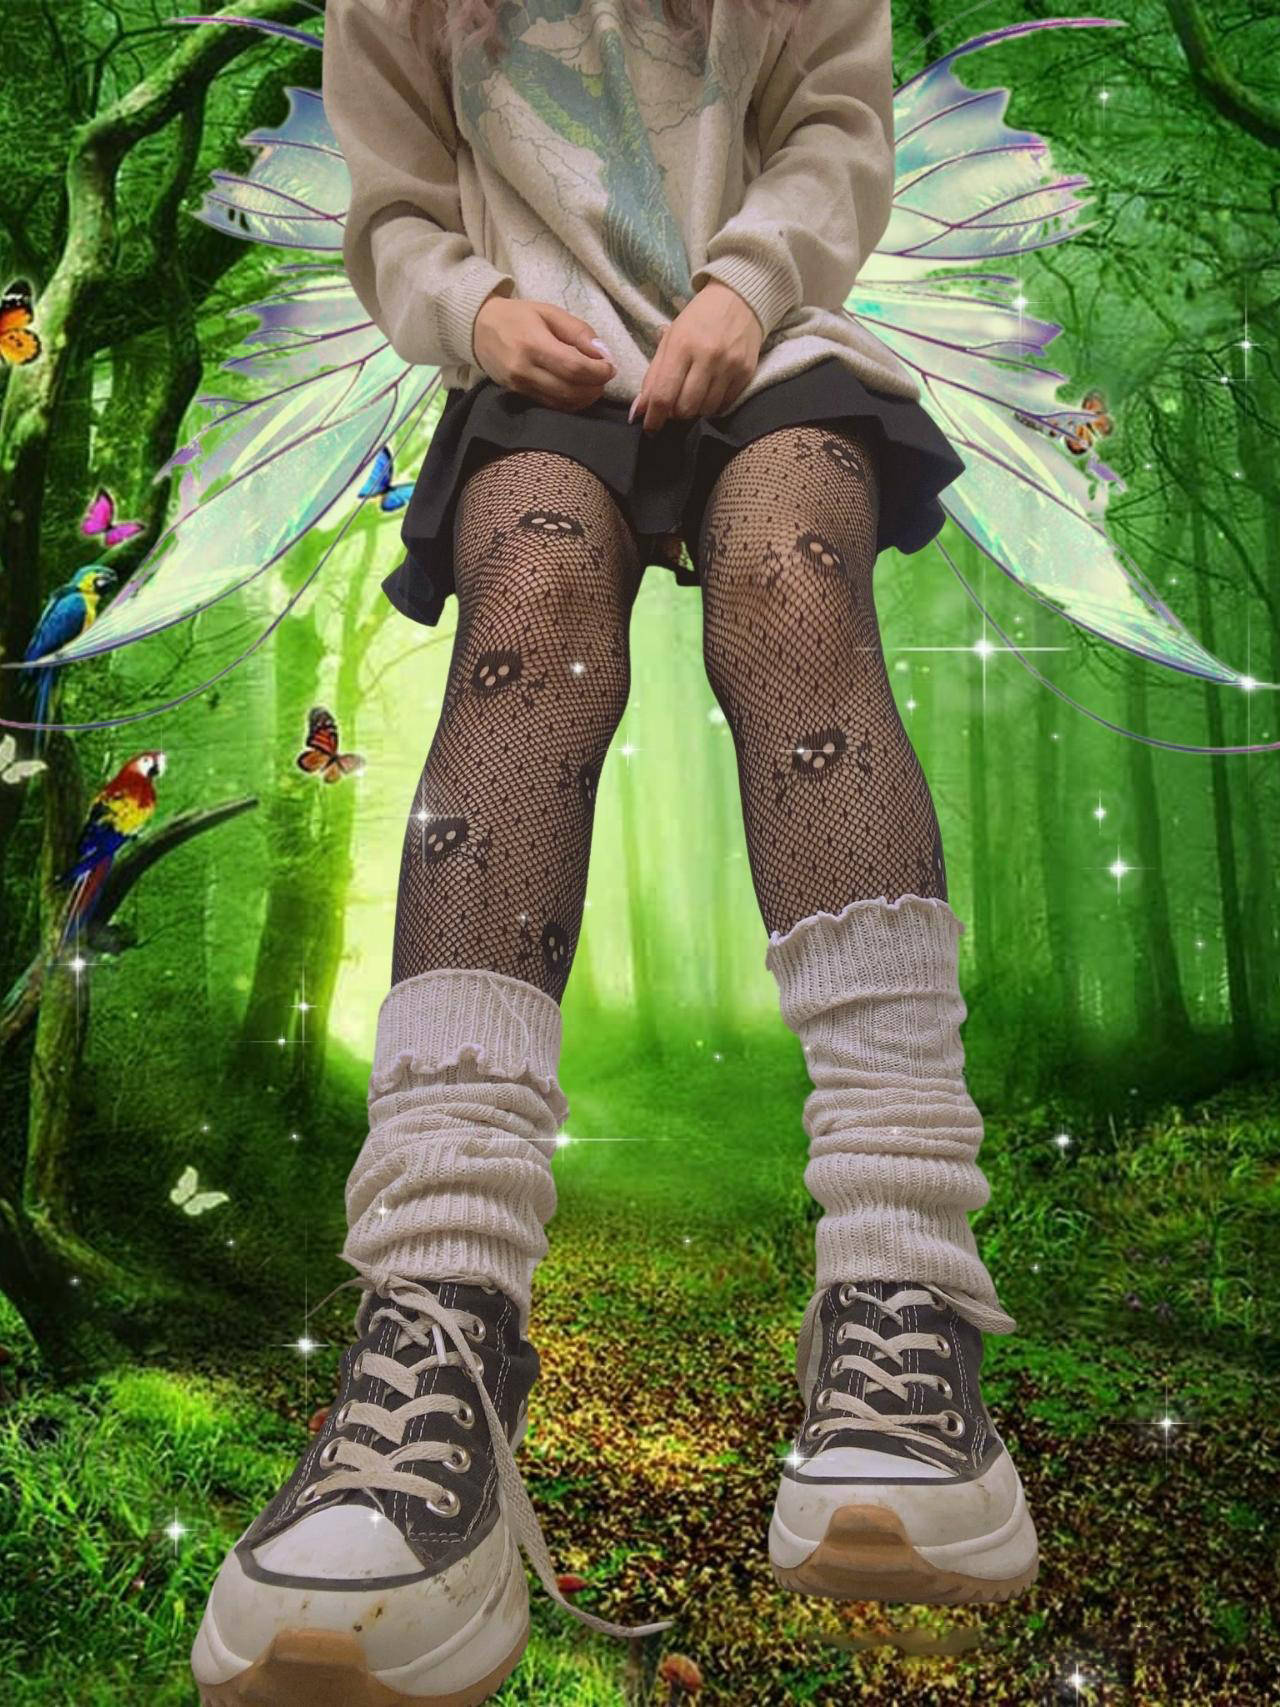 Fairy Grunge Sneakers And Tights Wallpaper